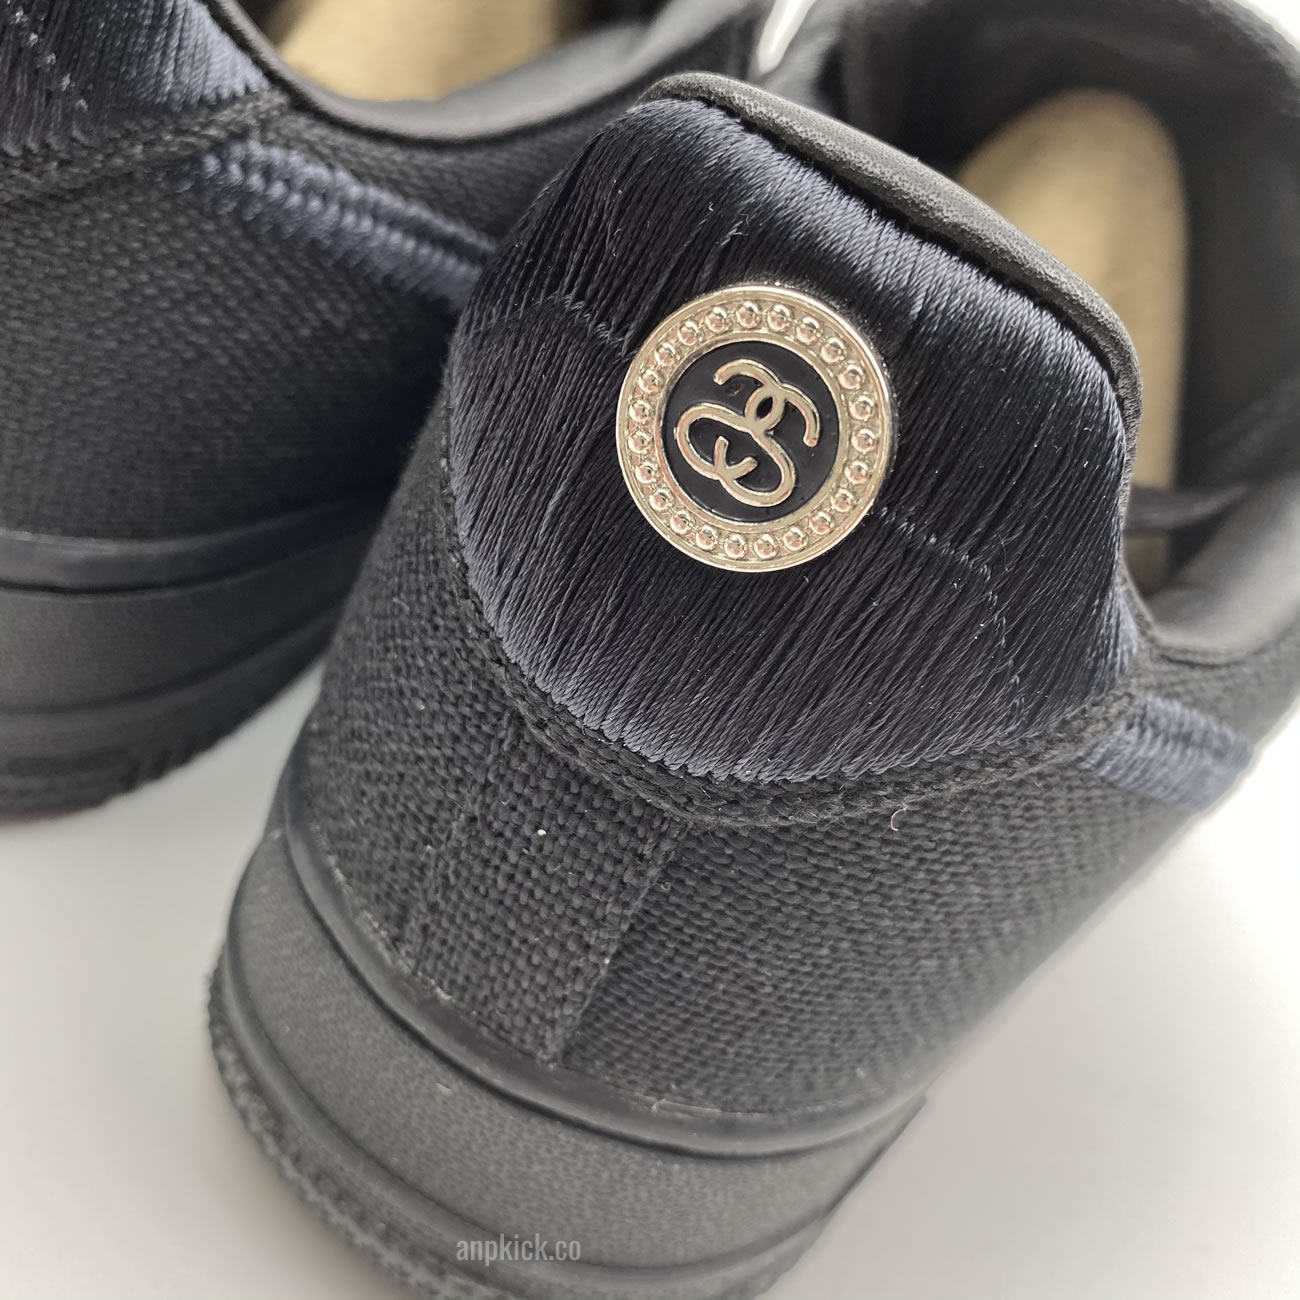 Stussy Nike Air Force 1 Low Black Cz9084 001 Release Date (7) - newkick.org